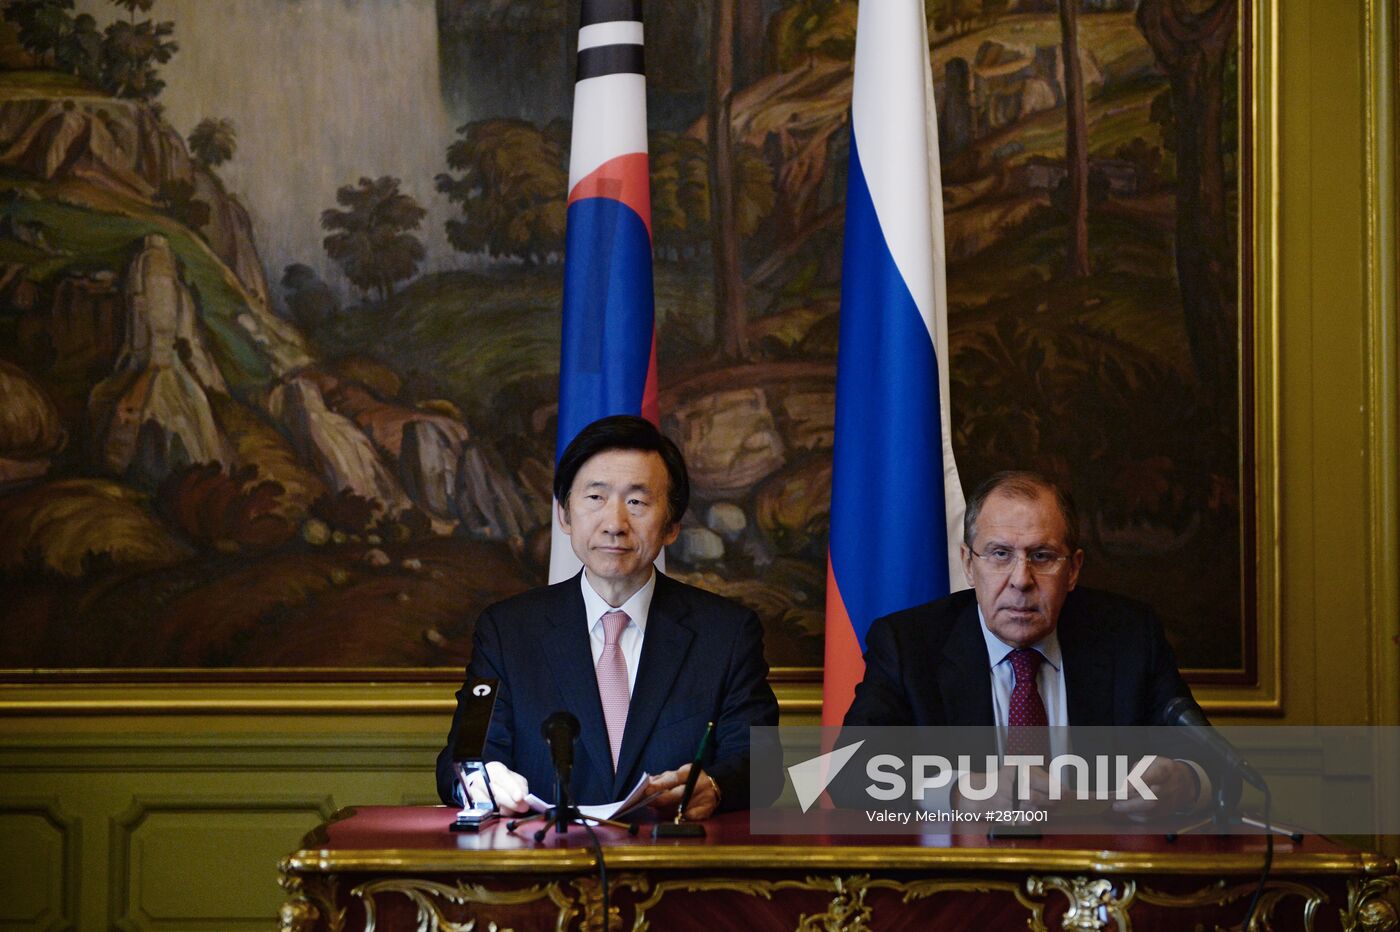 Meeting of Russia's and South Korea's foreign ministers Sergei Lavrov and Yun Byung-se